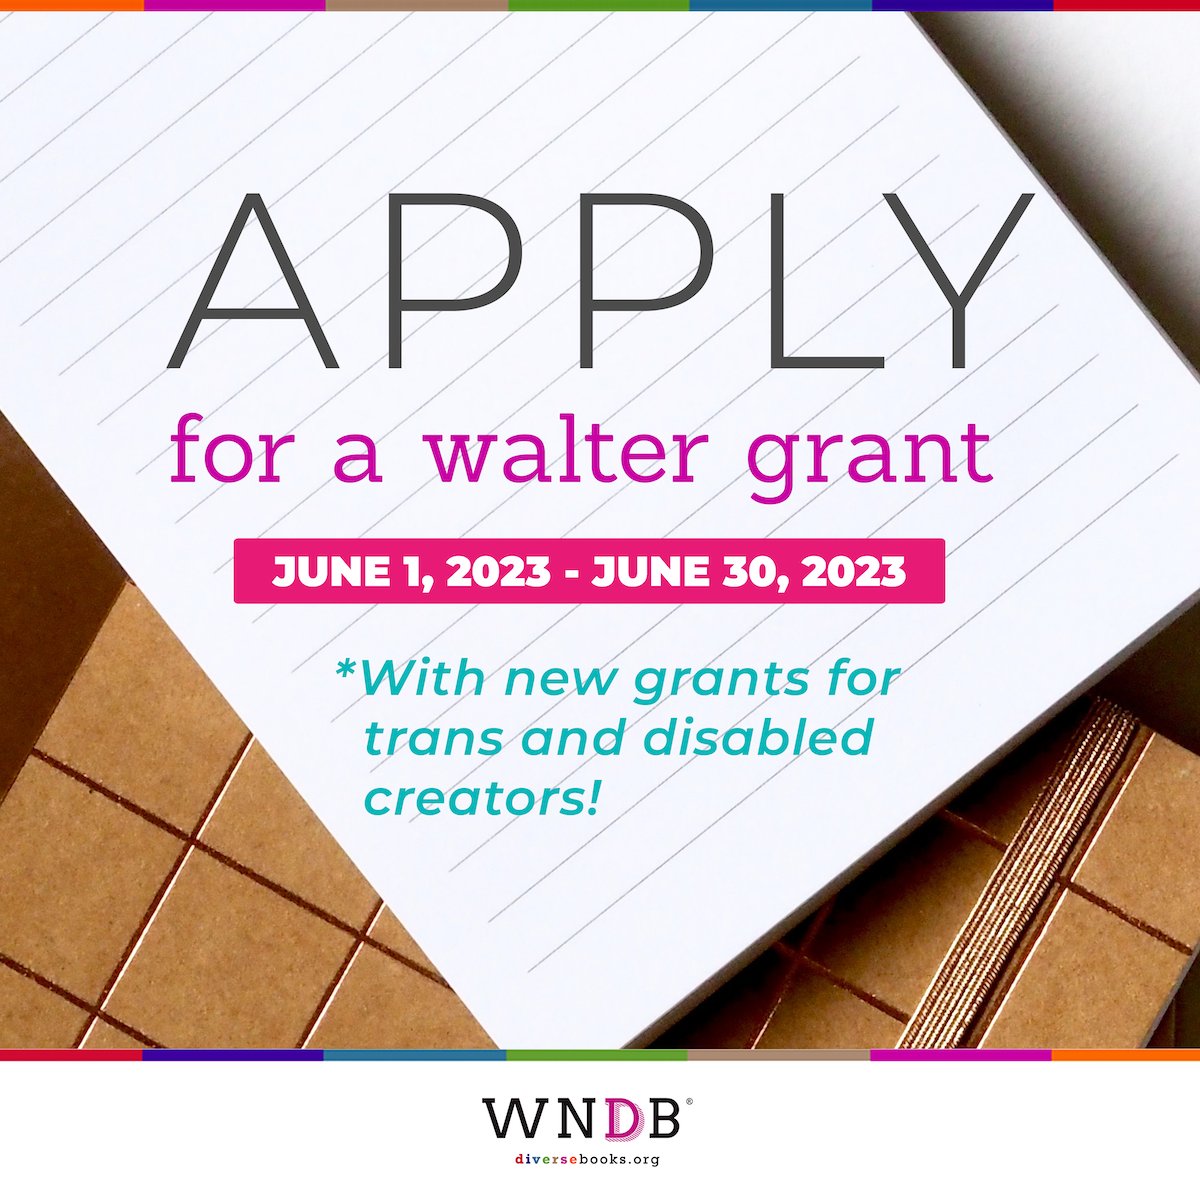 Applications for 2023 Walter Grants are now OPEN! These grants are for diverse, unpublished creators and award $2000 to each recipient. This year we have:

✨ 5 general grants
✨ 2 trans creator grants
✨ 1 disabled writer grant

Info + application here: ow.ly/eI4550OCcO7